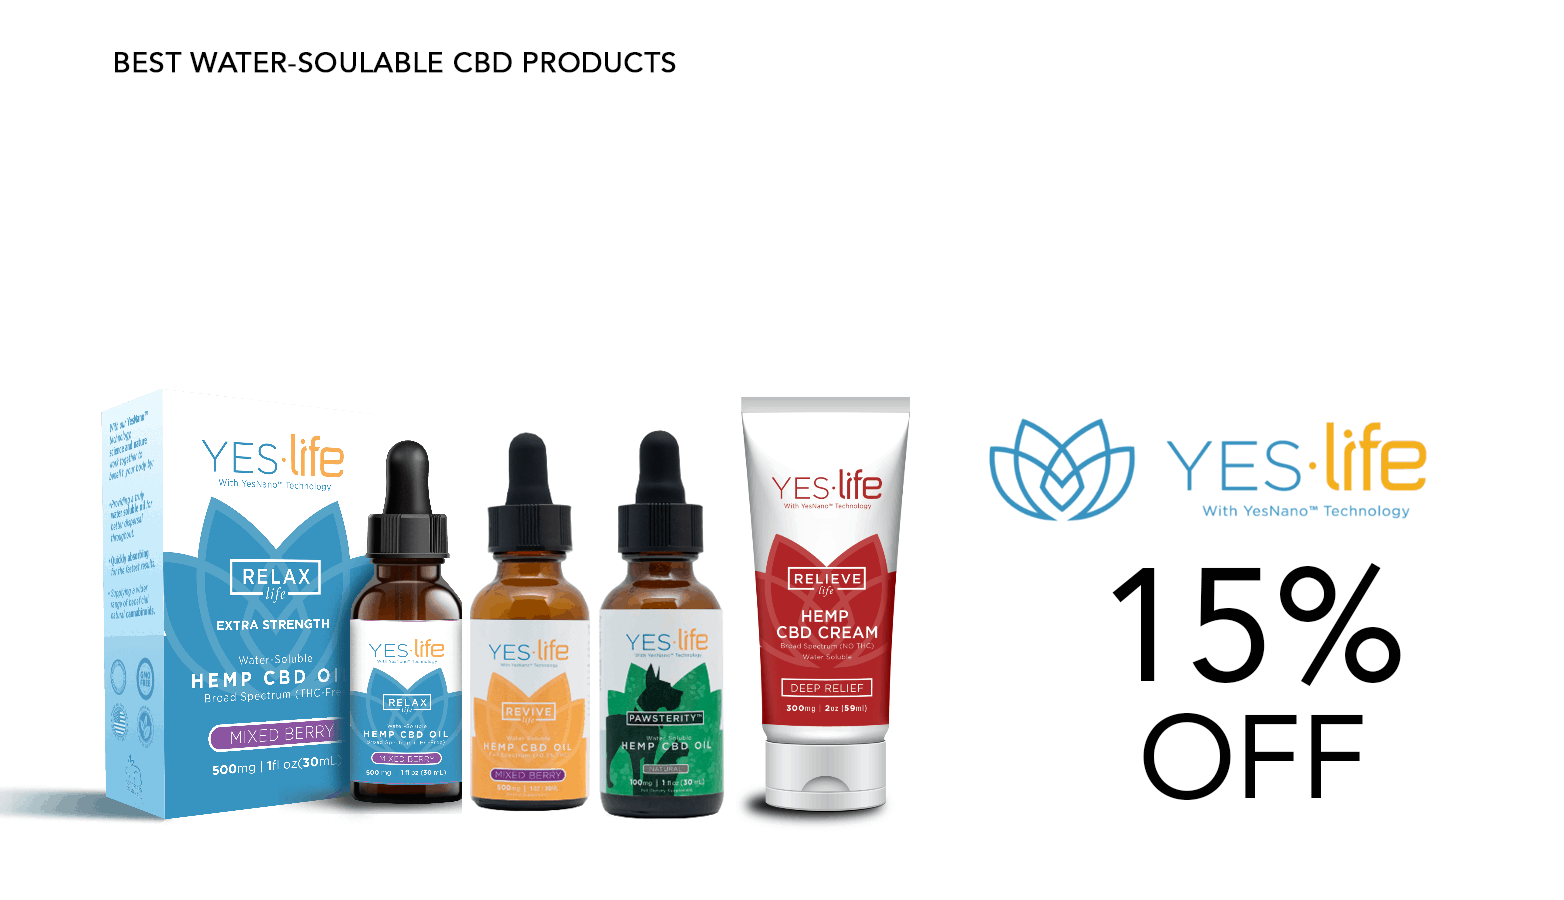 Yes.Life CBD Coupon Code Offer Website